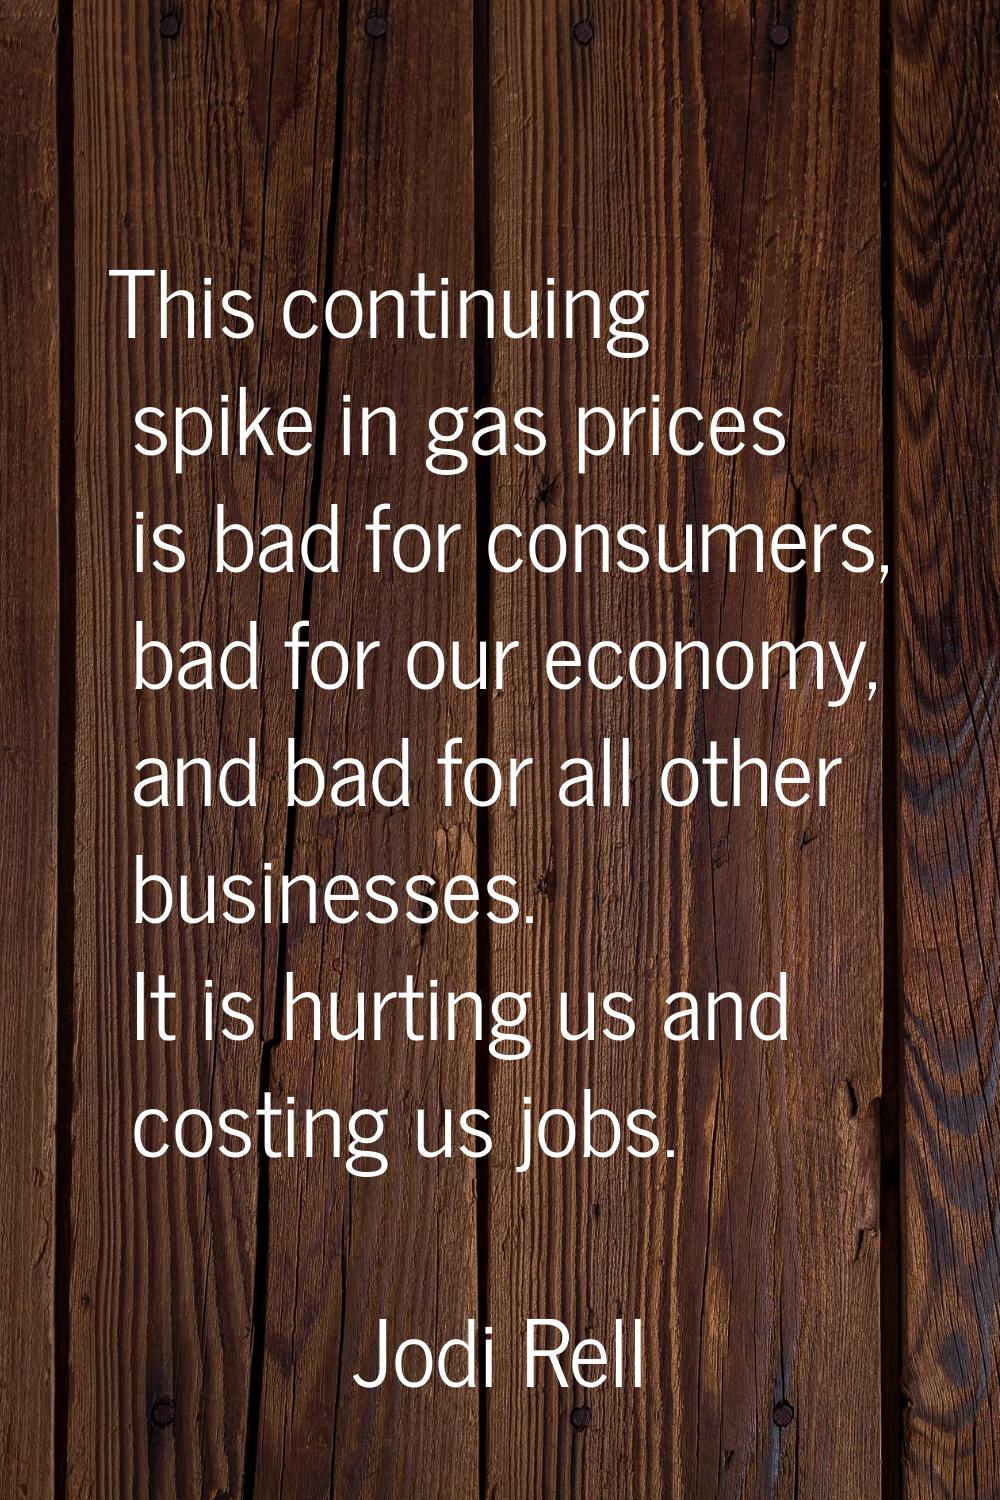 This continuing spike in gas prices is bad for consumers, bad for our economy, and bad for all othe